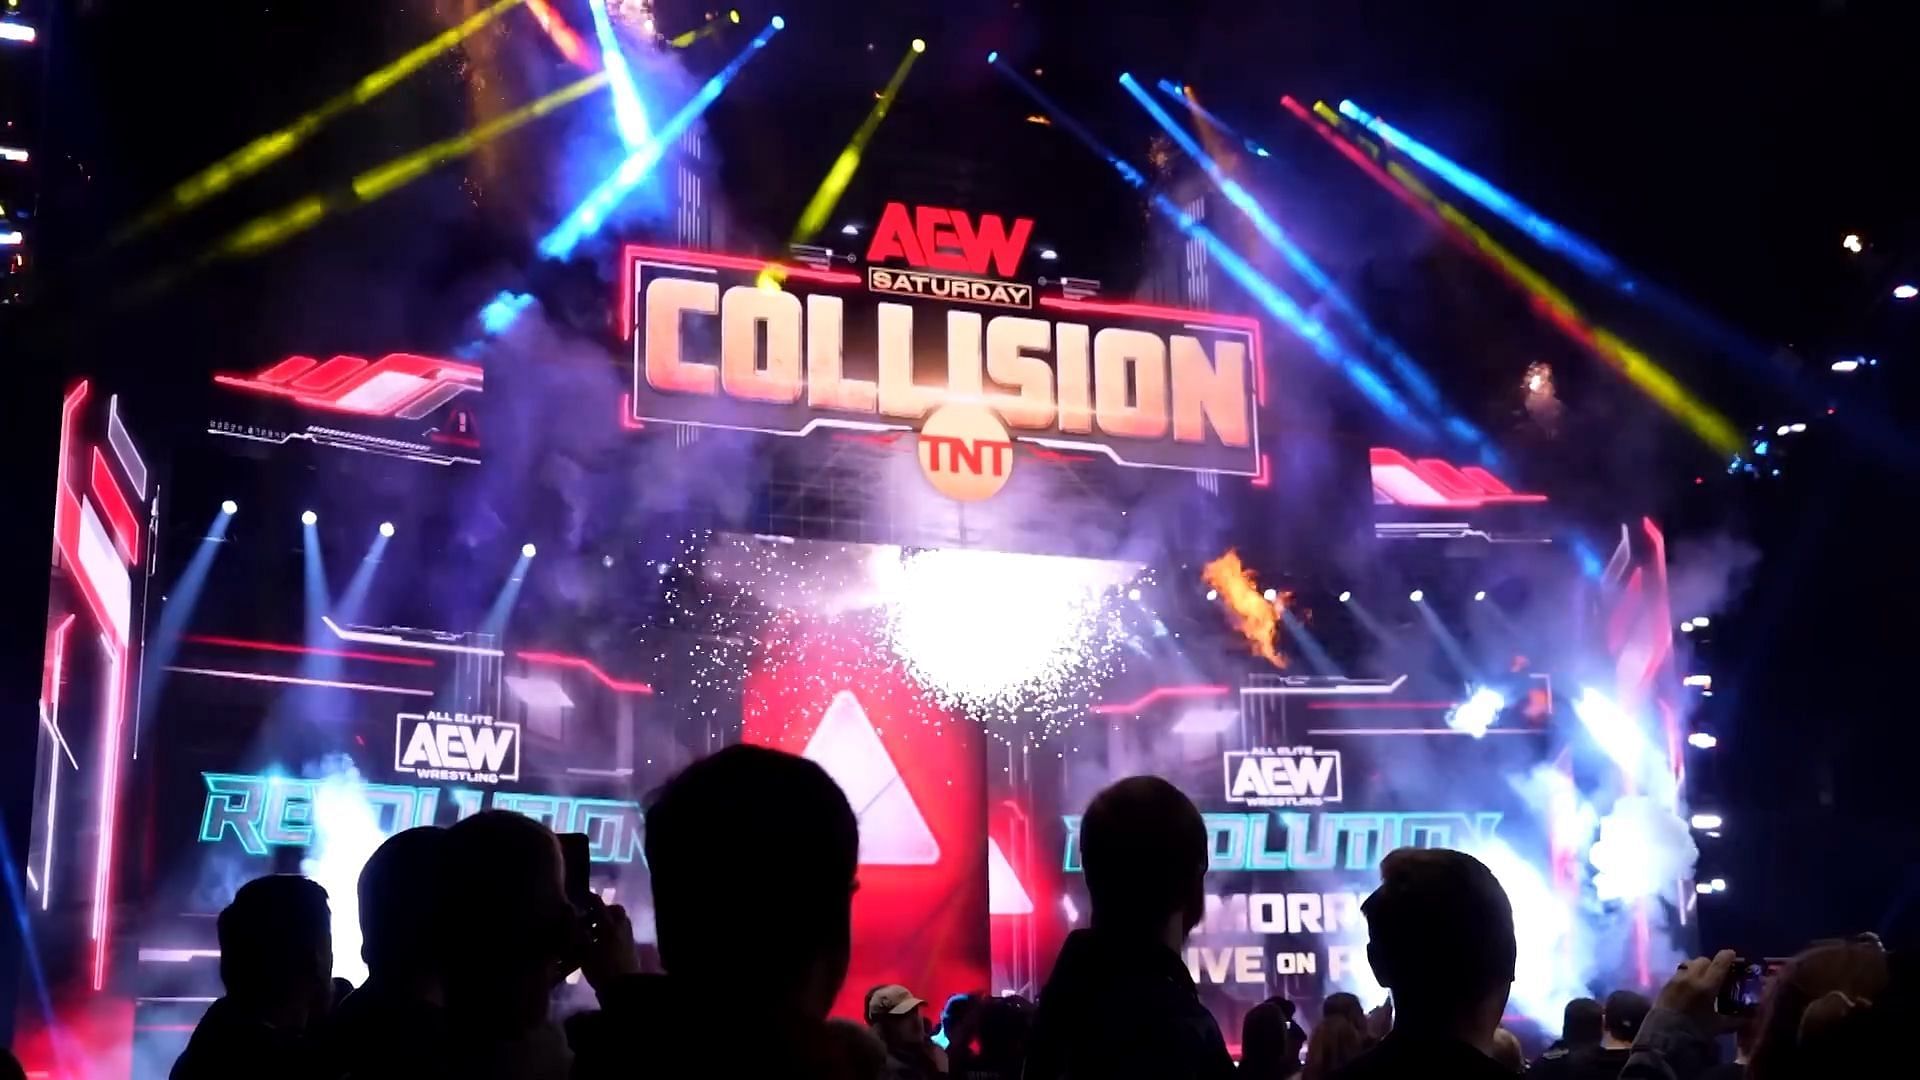 AEW Collision had a strong showing this week (image credit: All Elite Wrestling on YouTube)